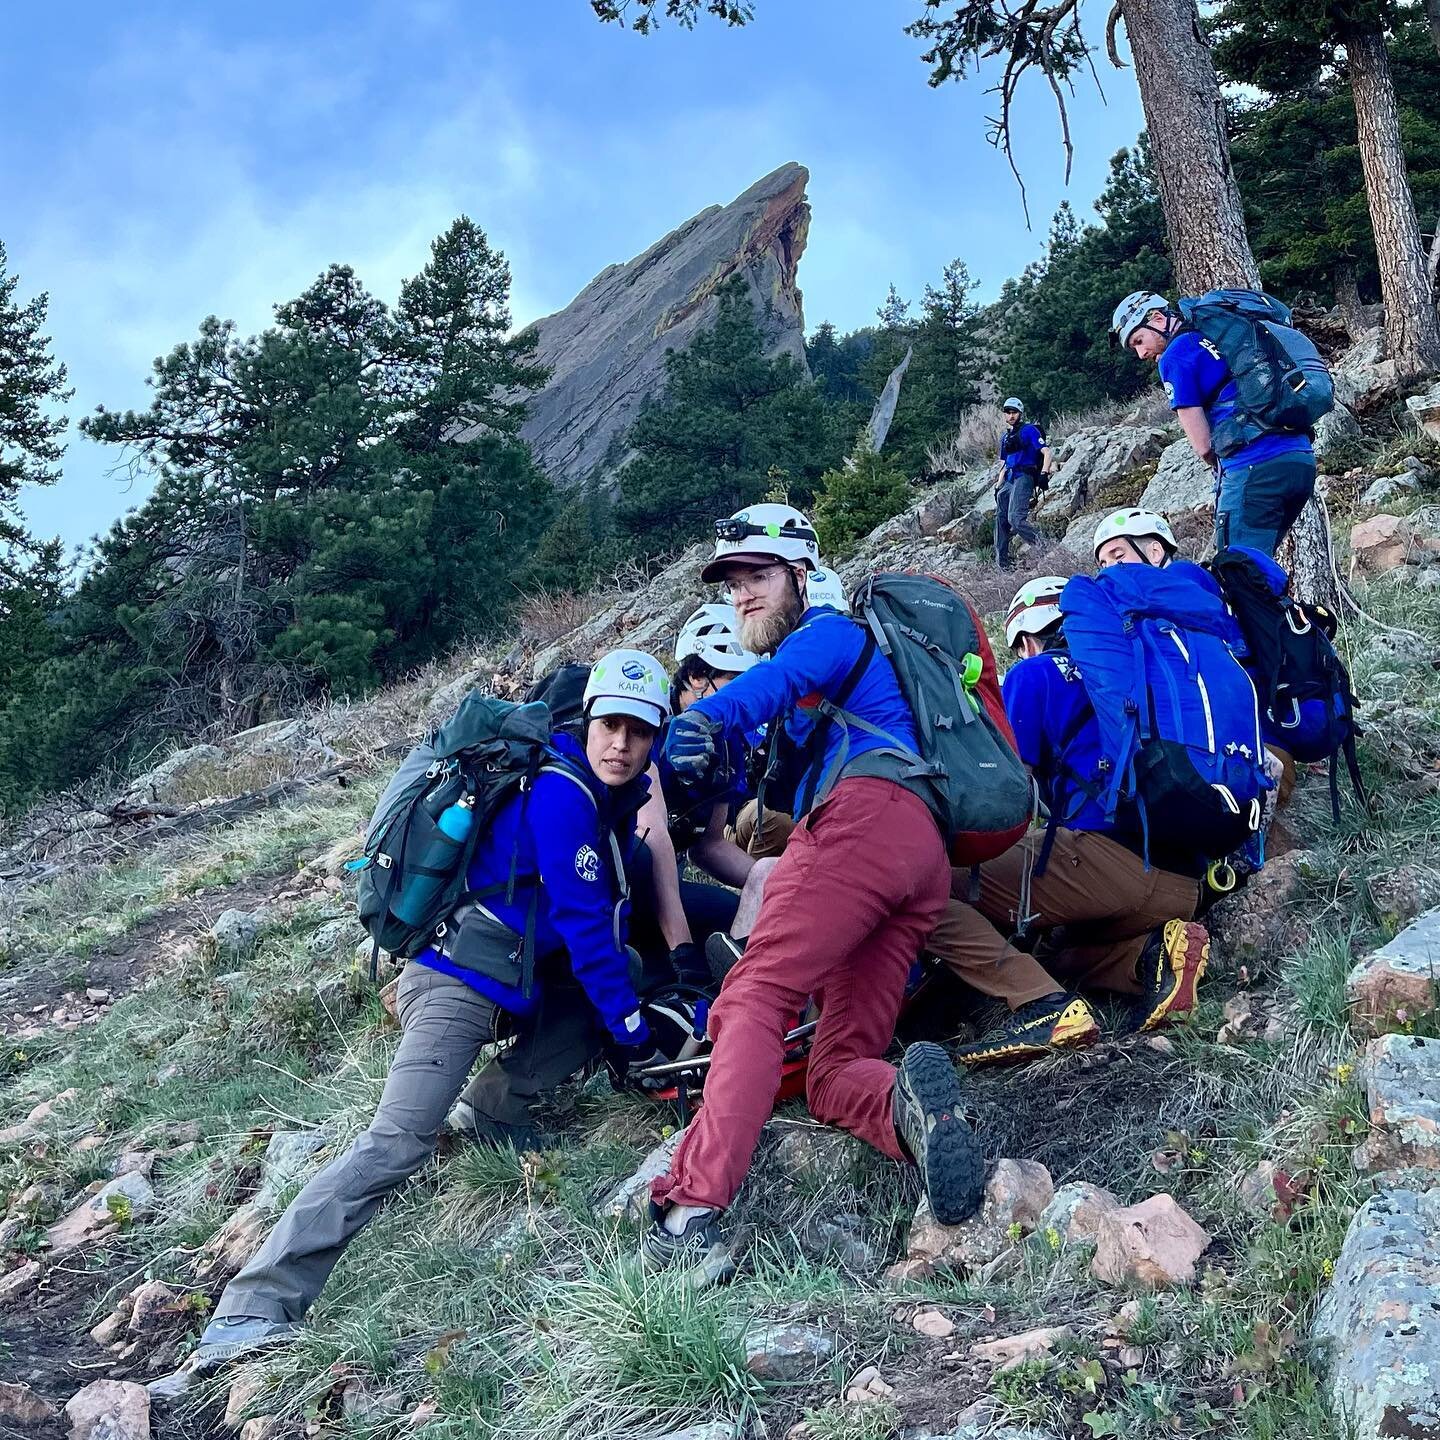 Yesterday we assisted a hiker with a knee injury on the 1st/2nd Flatiron trail. We are happy to provide search and rescue services to our community and never charge for rescue.